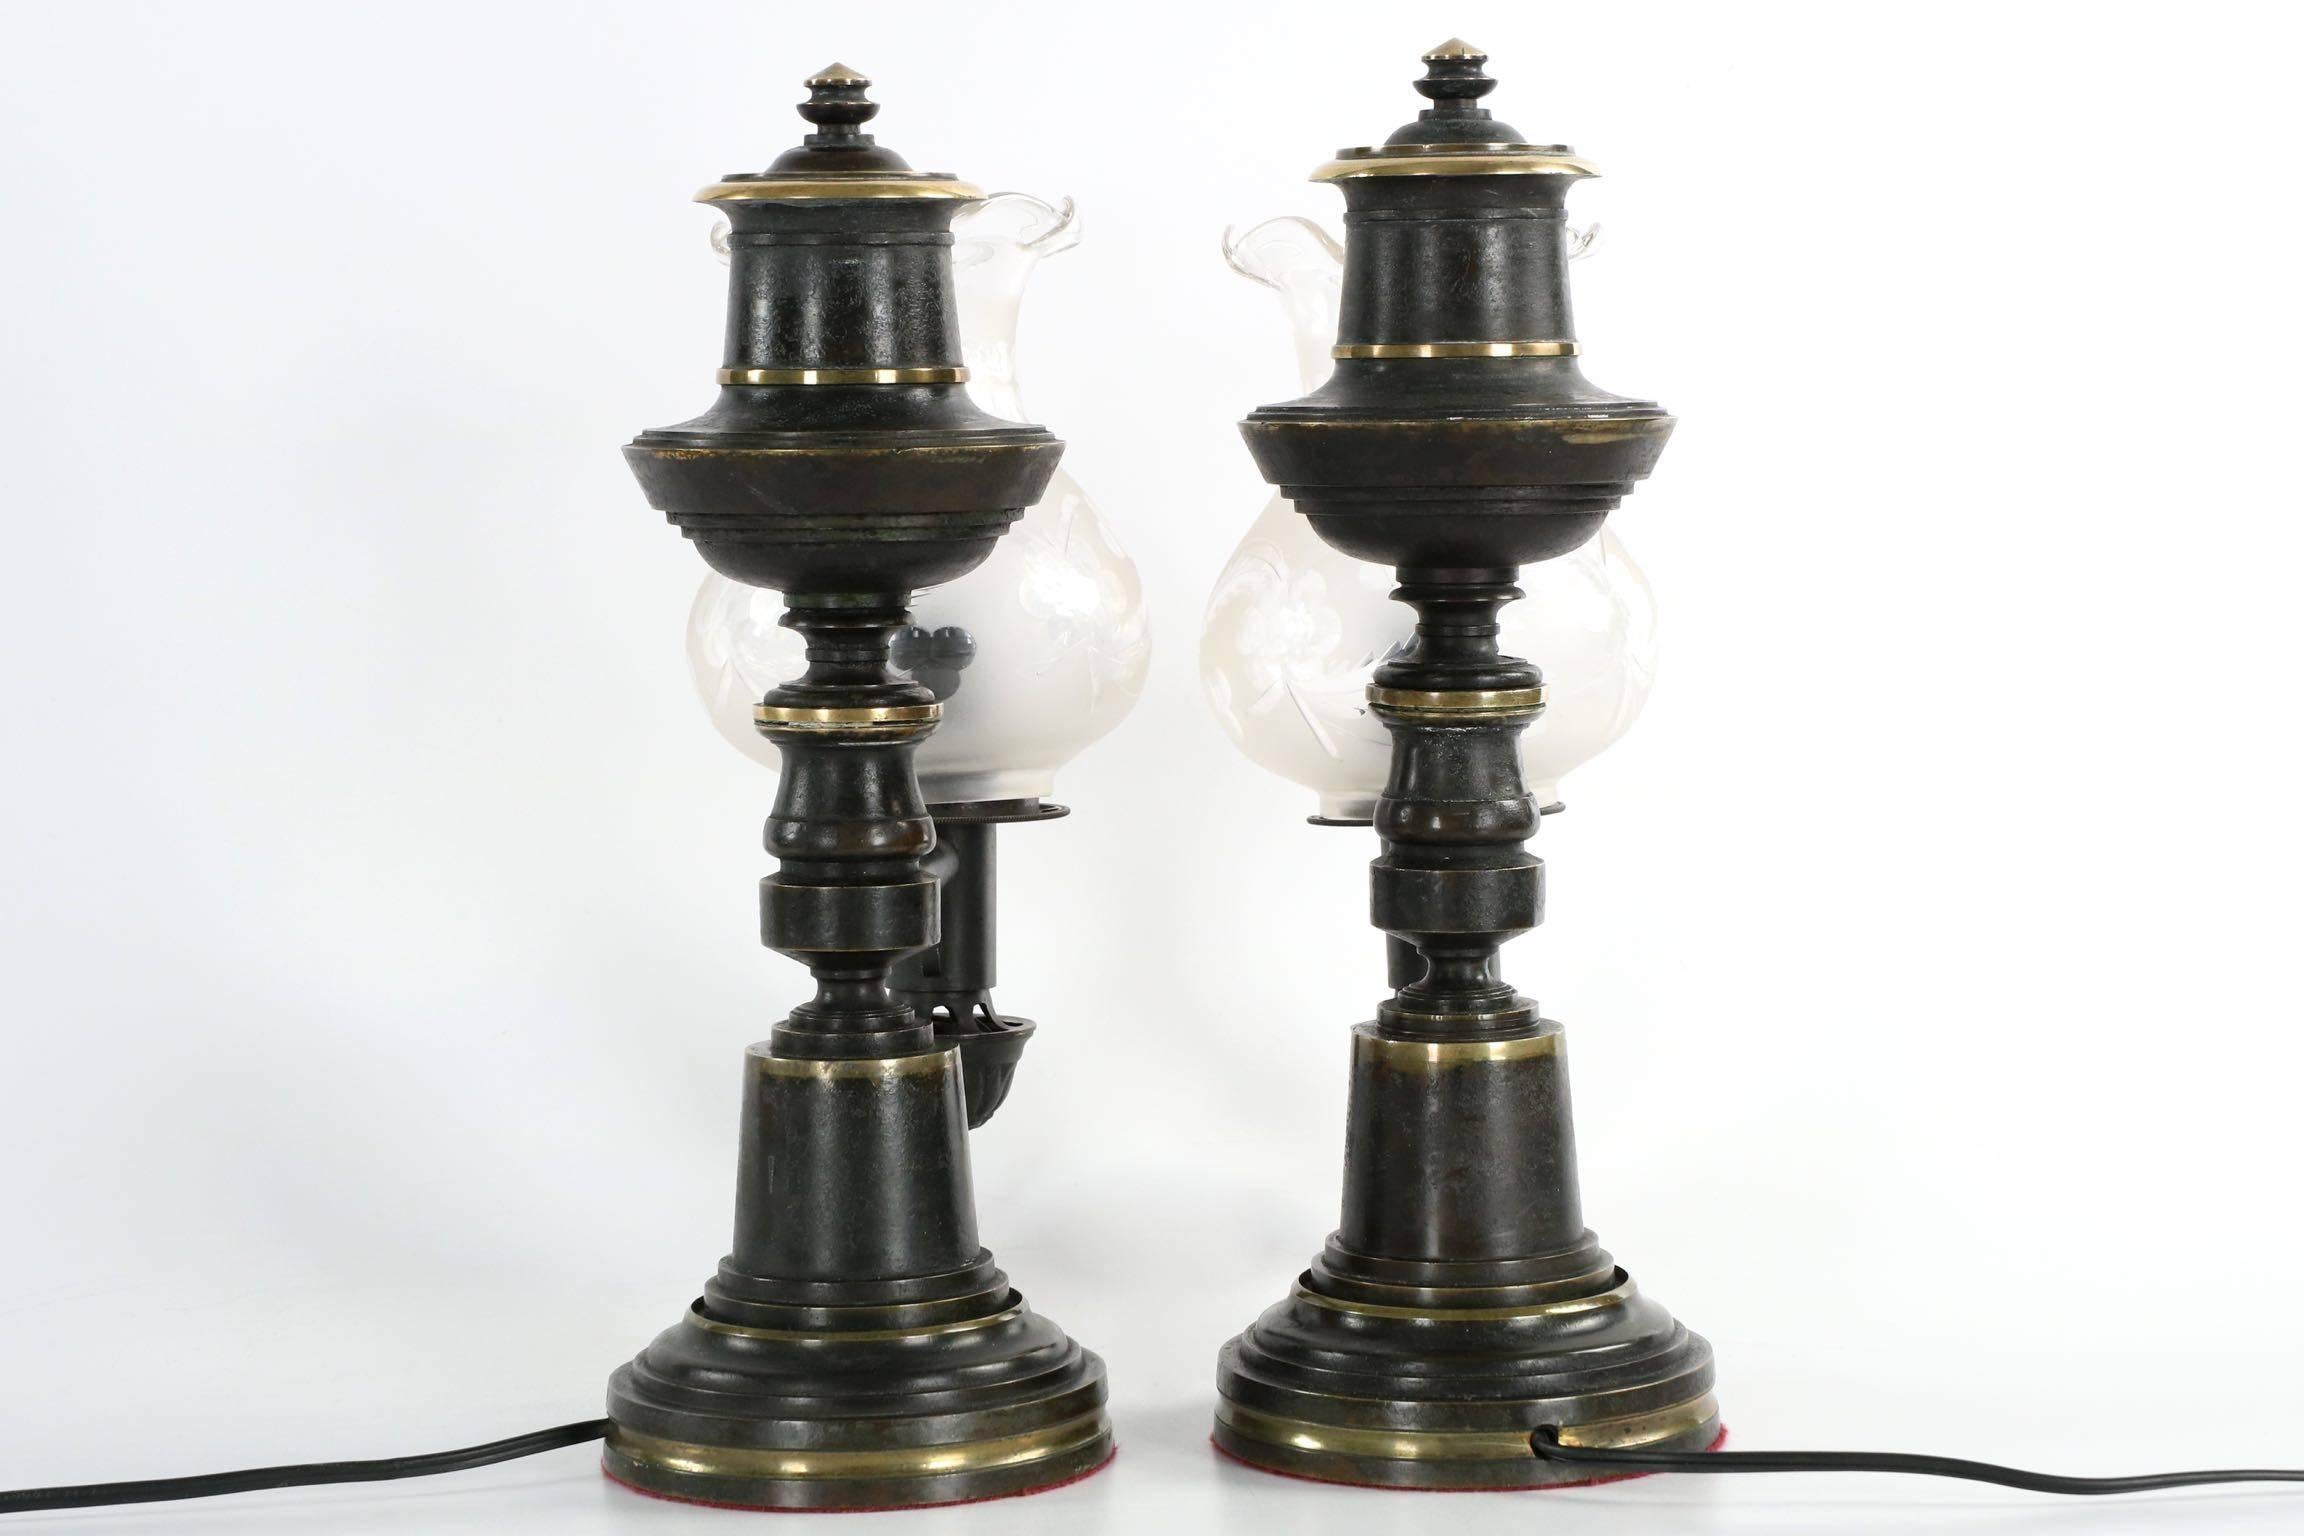 On this fine pair of electrified antique table lamps, the brass is patinated to a deep oiled black which is highlighted with a recurring strata of applied natural brass banding encircling the lamps. At the base, each lamp starts out with a brief